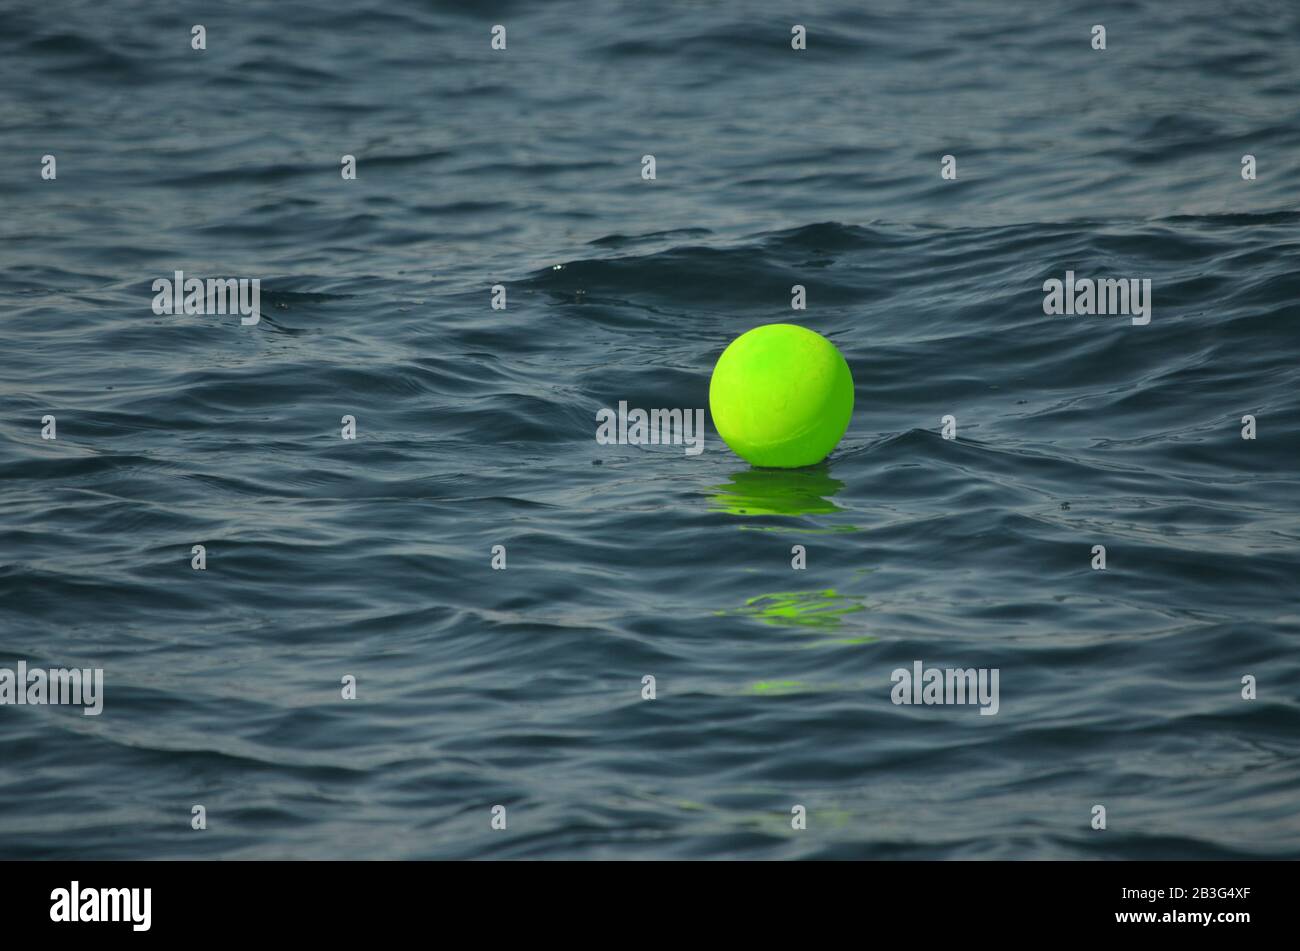 Neon green helium balloon floating in the Atlantic Ocean.  Balloons and other plastics can harm marine life by ingestion or entanglement. Stock Photo